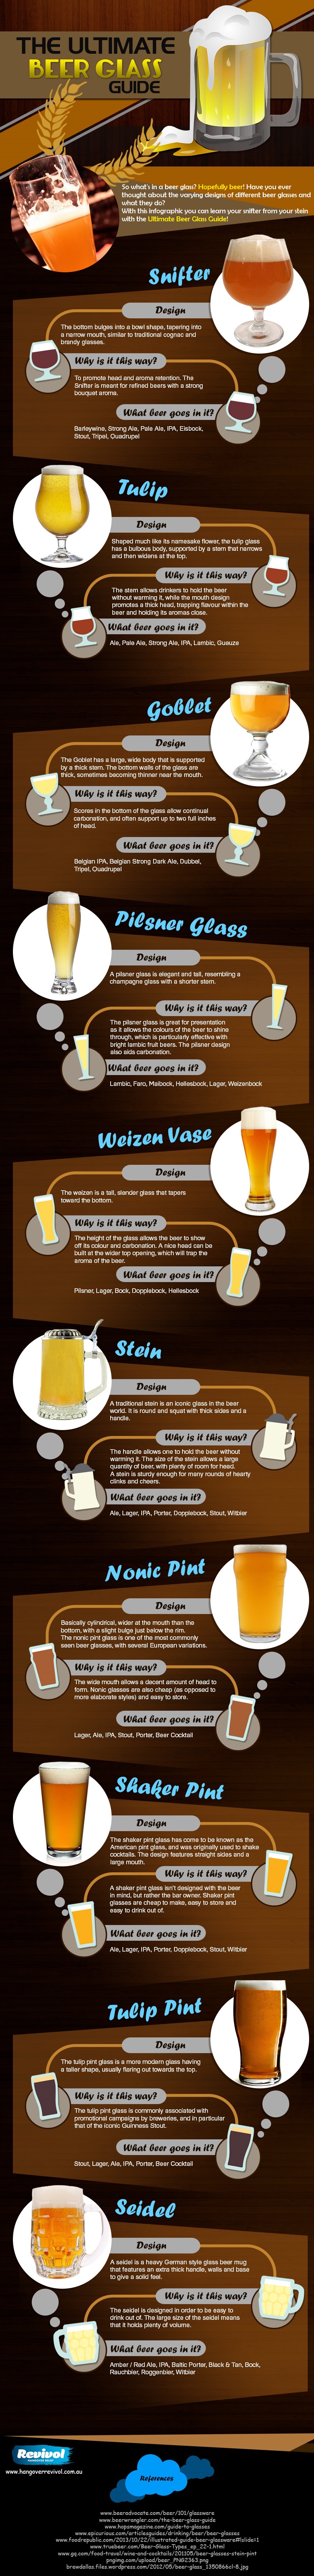 https://i.visual.ly/images/the-ultimate-beer-glass-guide_5440eb7335092.jpg